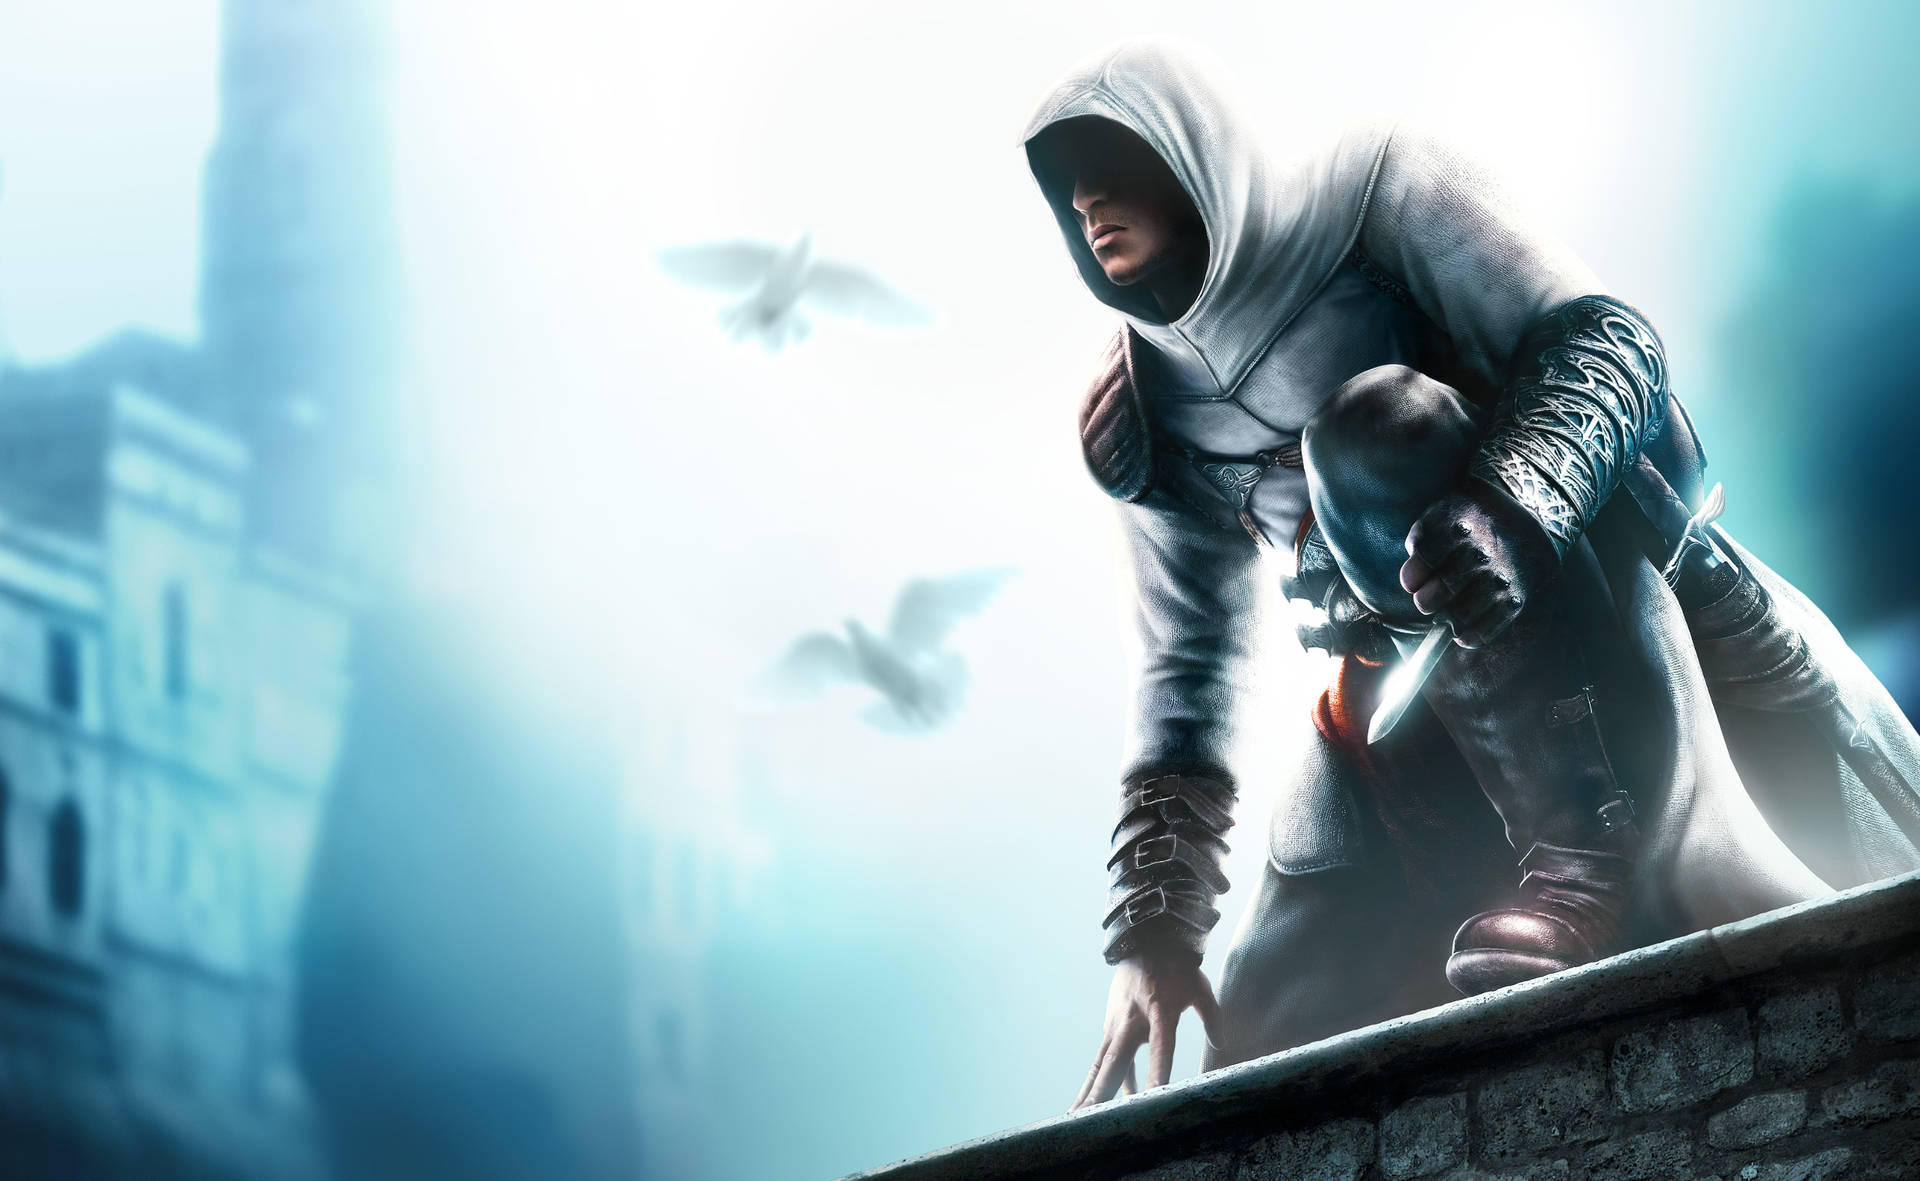 Assassin's Creed Protagonist Altair Wallpaper